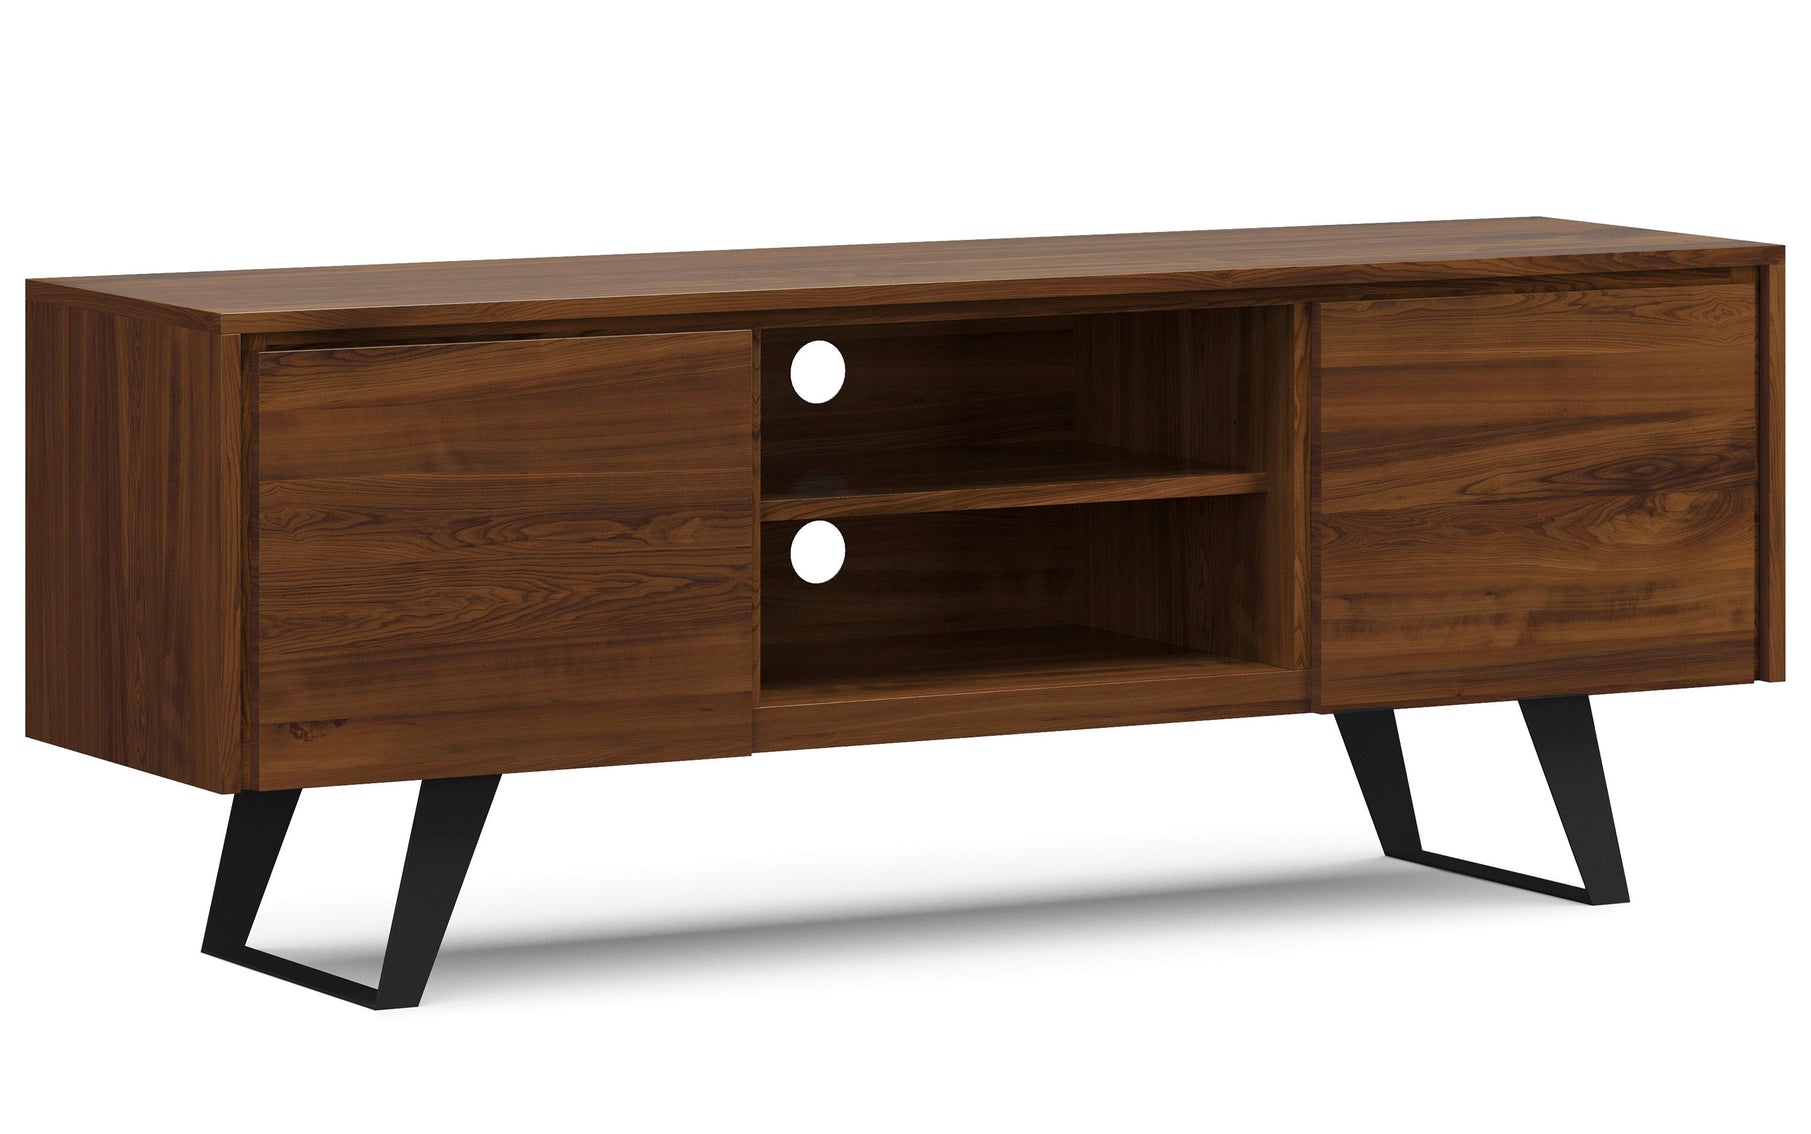 Walnut Walnut | Lowry Solid Acacia Wood Wide TV Media Stand For TVs up to 70 Inches